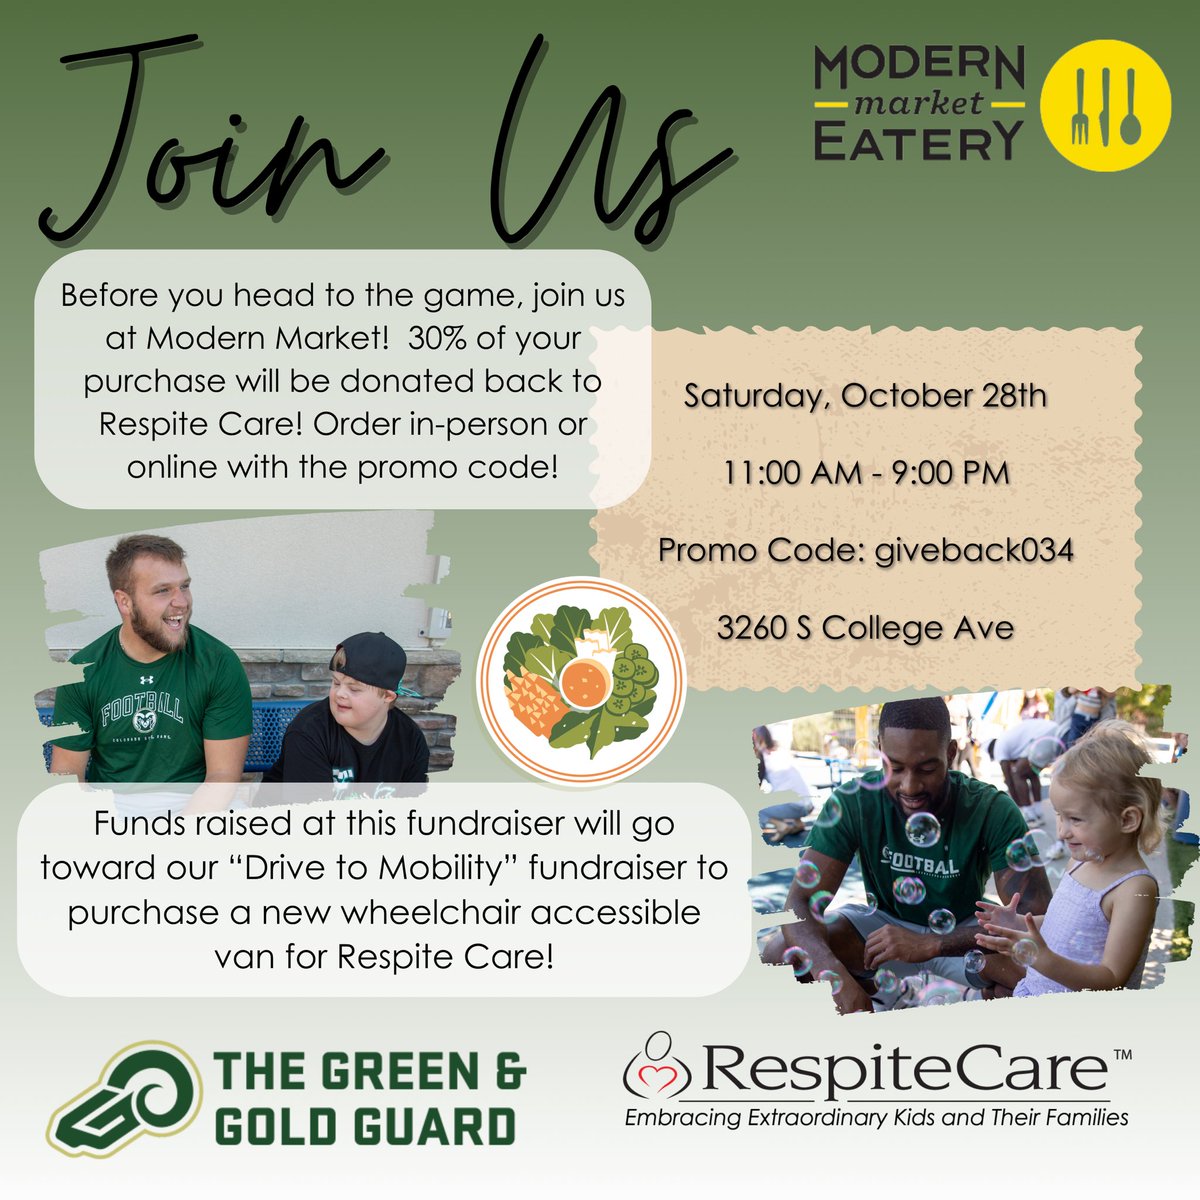 Tomorrow is going to be a perfect time to swing by Modern Market in mid-town before the game to help support the @RespiteCareFTC #DriveToMobility. We’d love for you to stop in, warm up, grab some food, and help. Thank you!